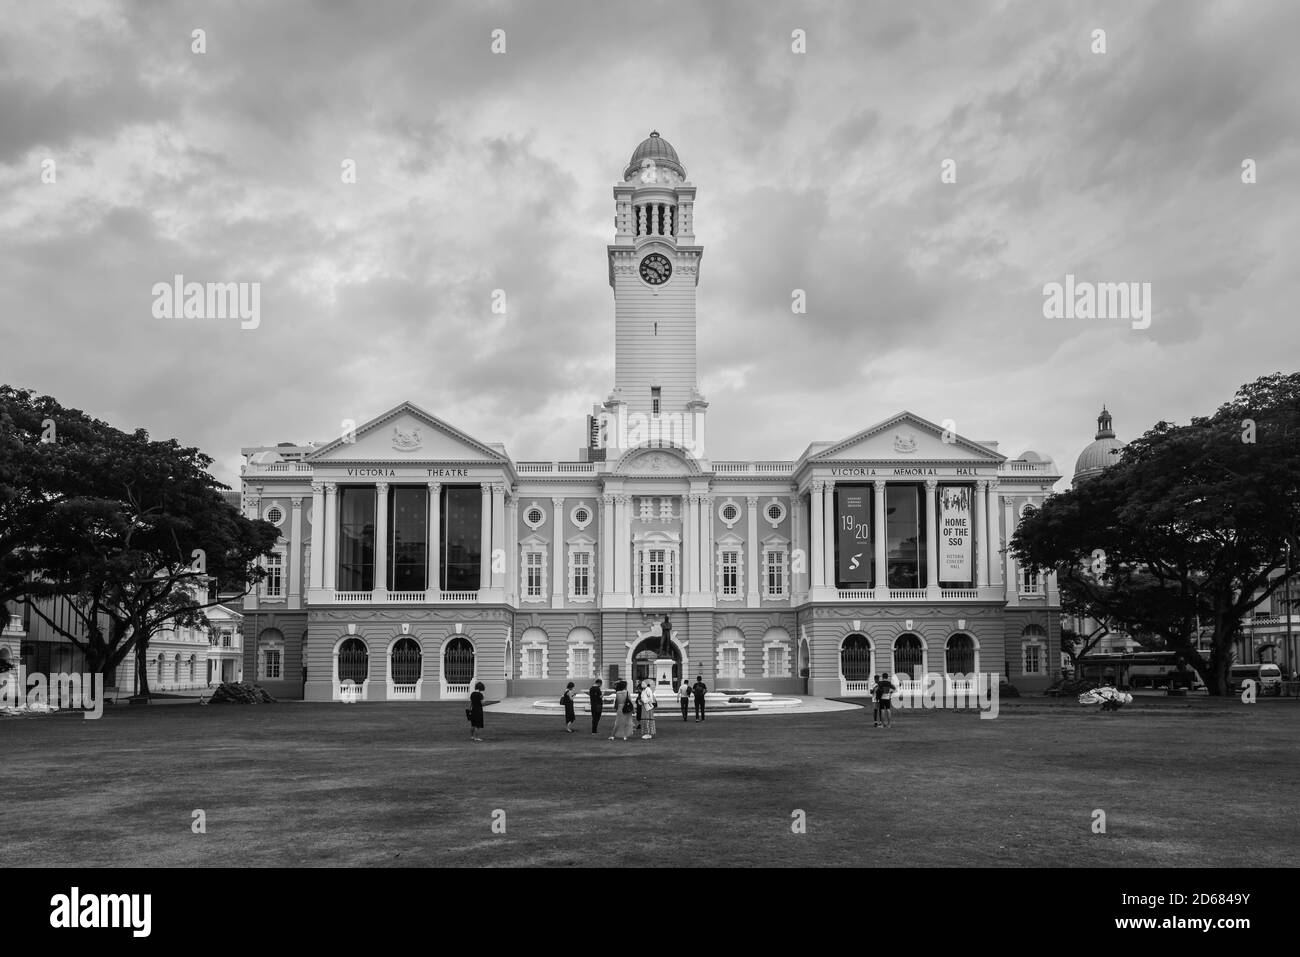 Singapore - December 3, 2019:  The Victoria Theatre and Concert Hall in Singapore. Black and white photo in retro style. Stock Photo